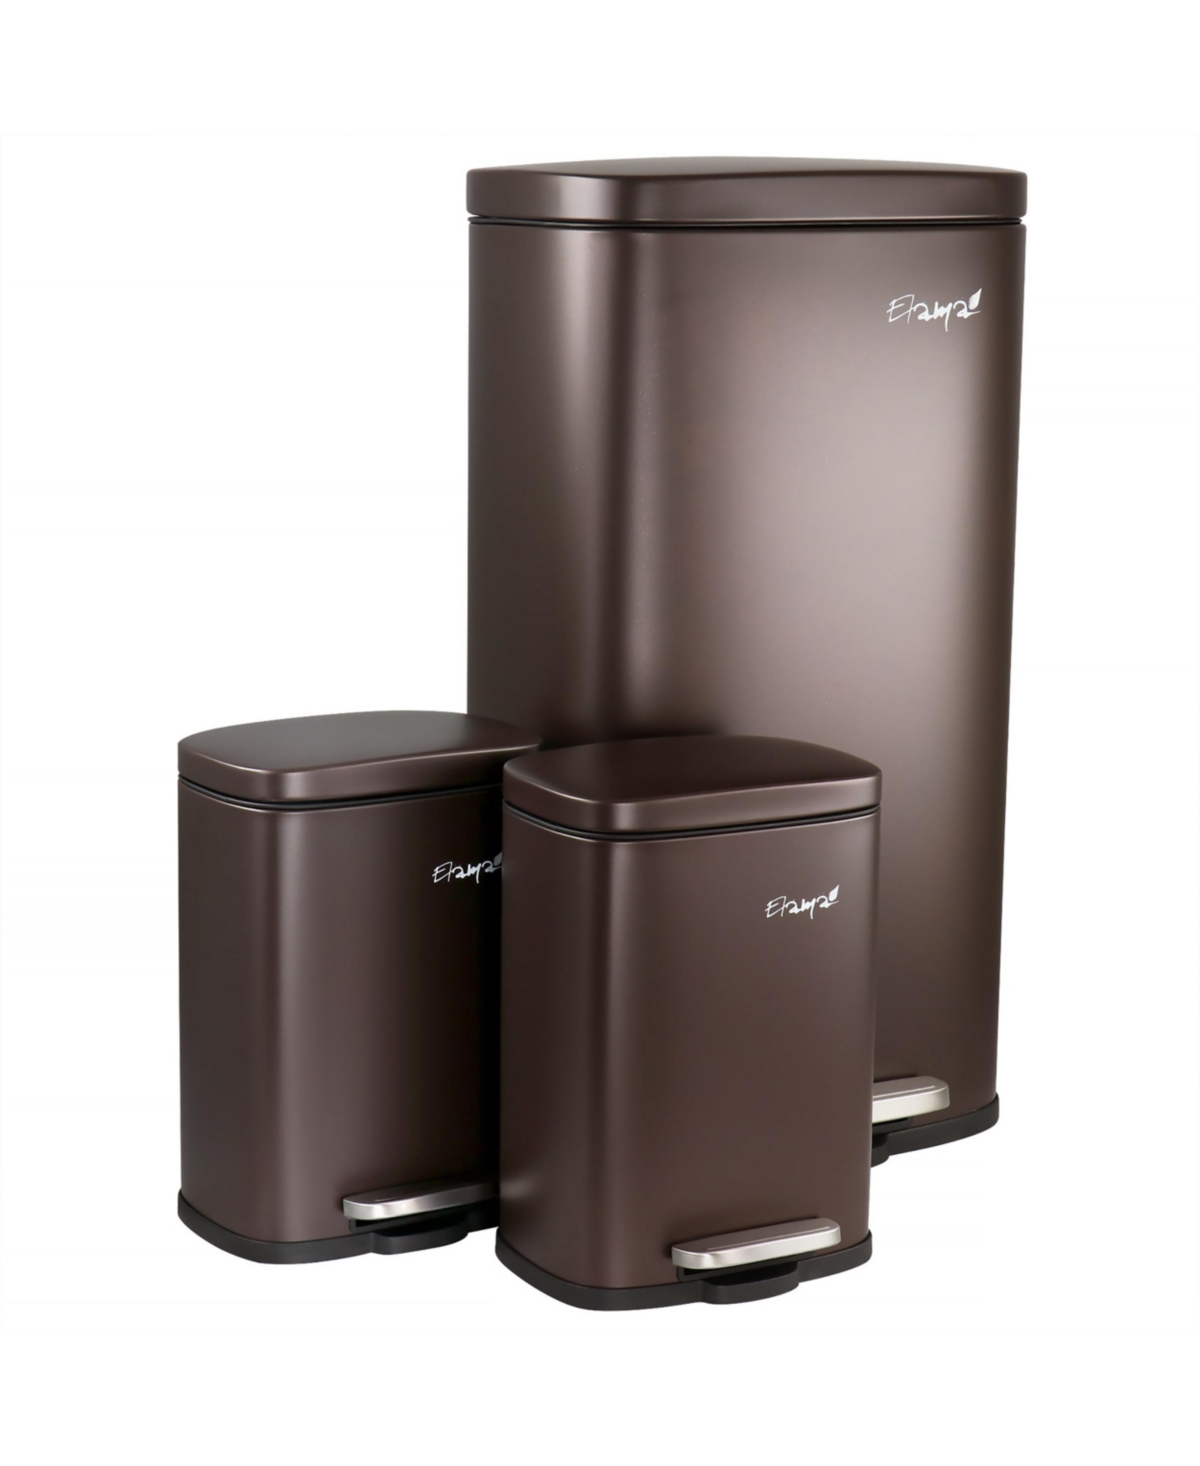 3 Piece 30 Liter and 5 Liter Stainless Steel Step Trash Bin Combo Set with Slow Close Mechanism in Matte Bronze - Brown